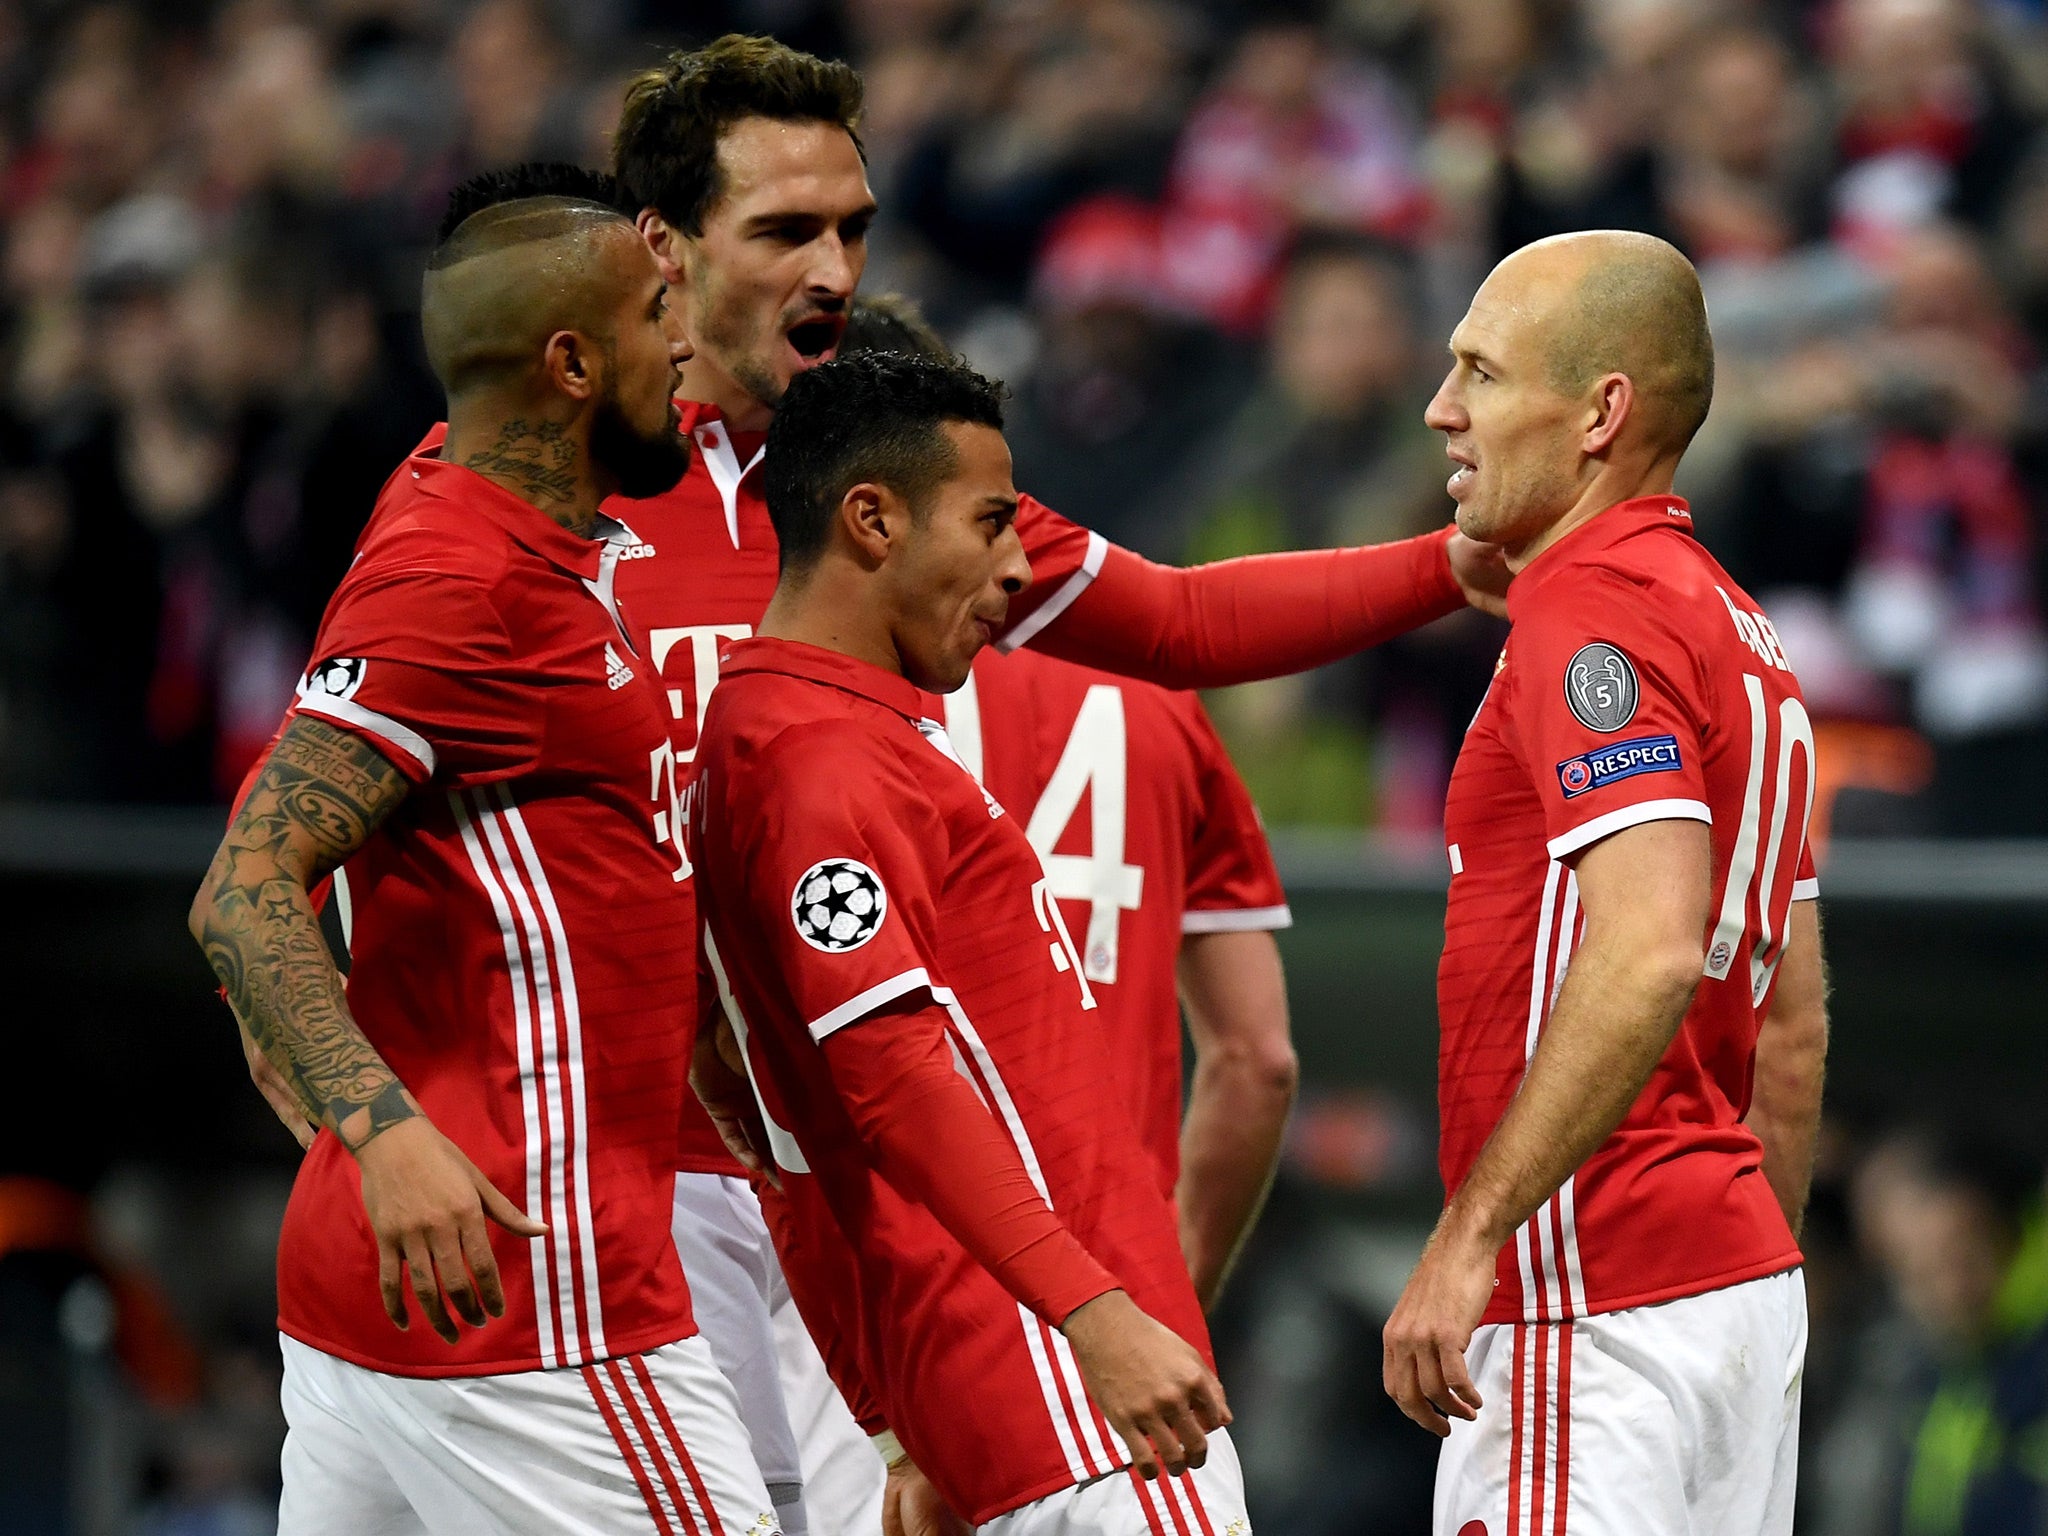 Arjen Robben put the hosts ahead with a splendid strike from range in the opening exchanges